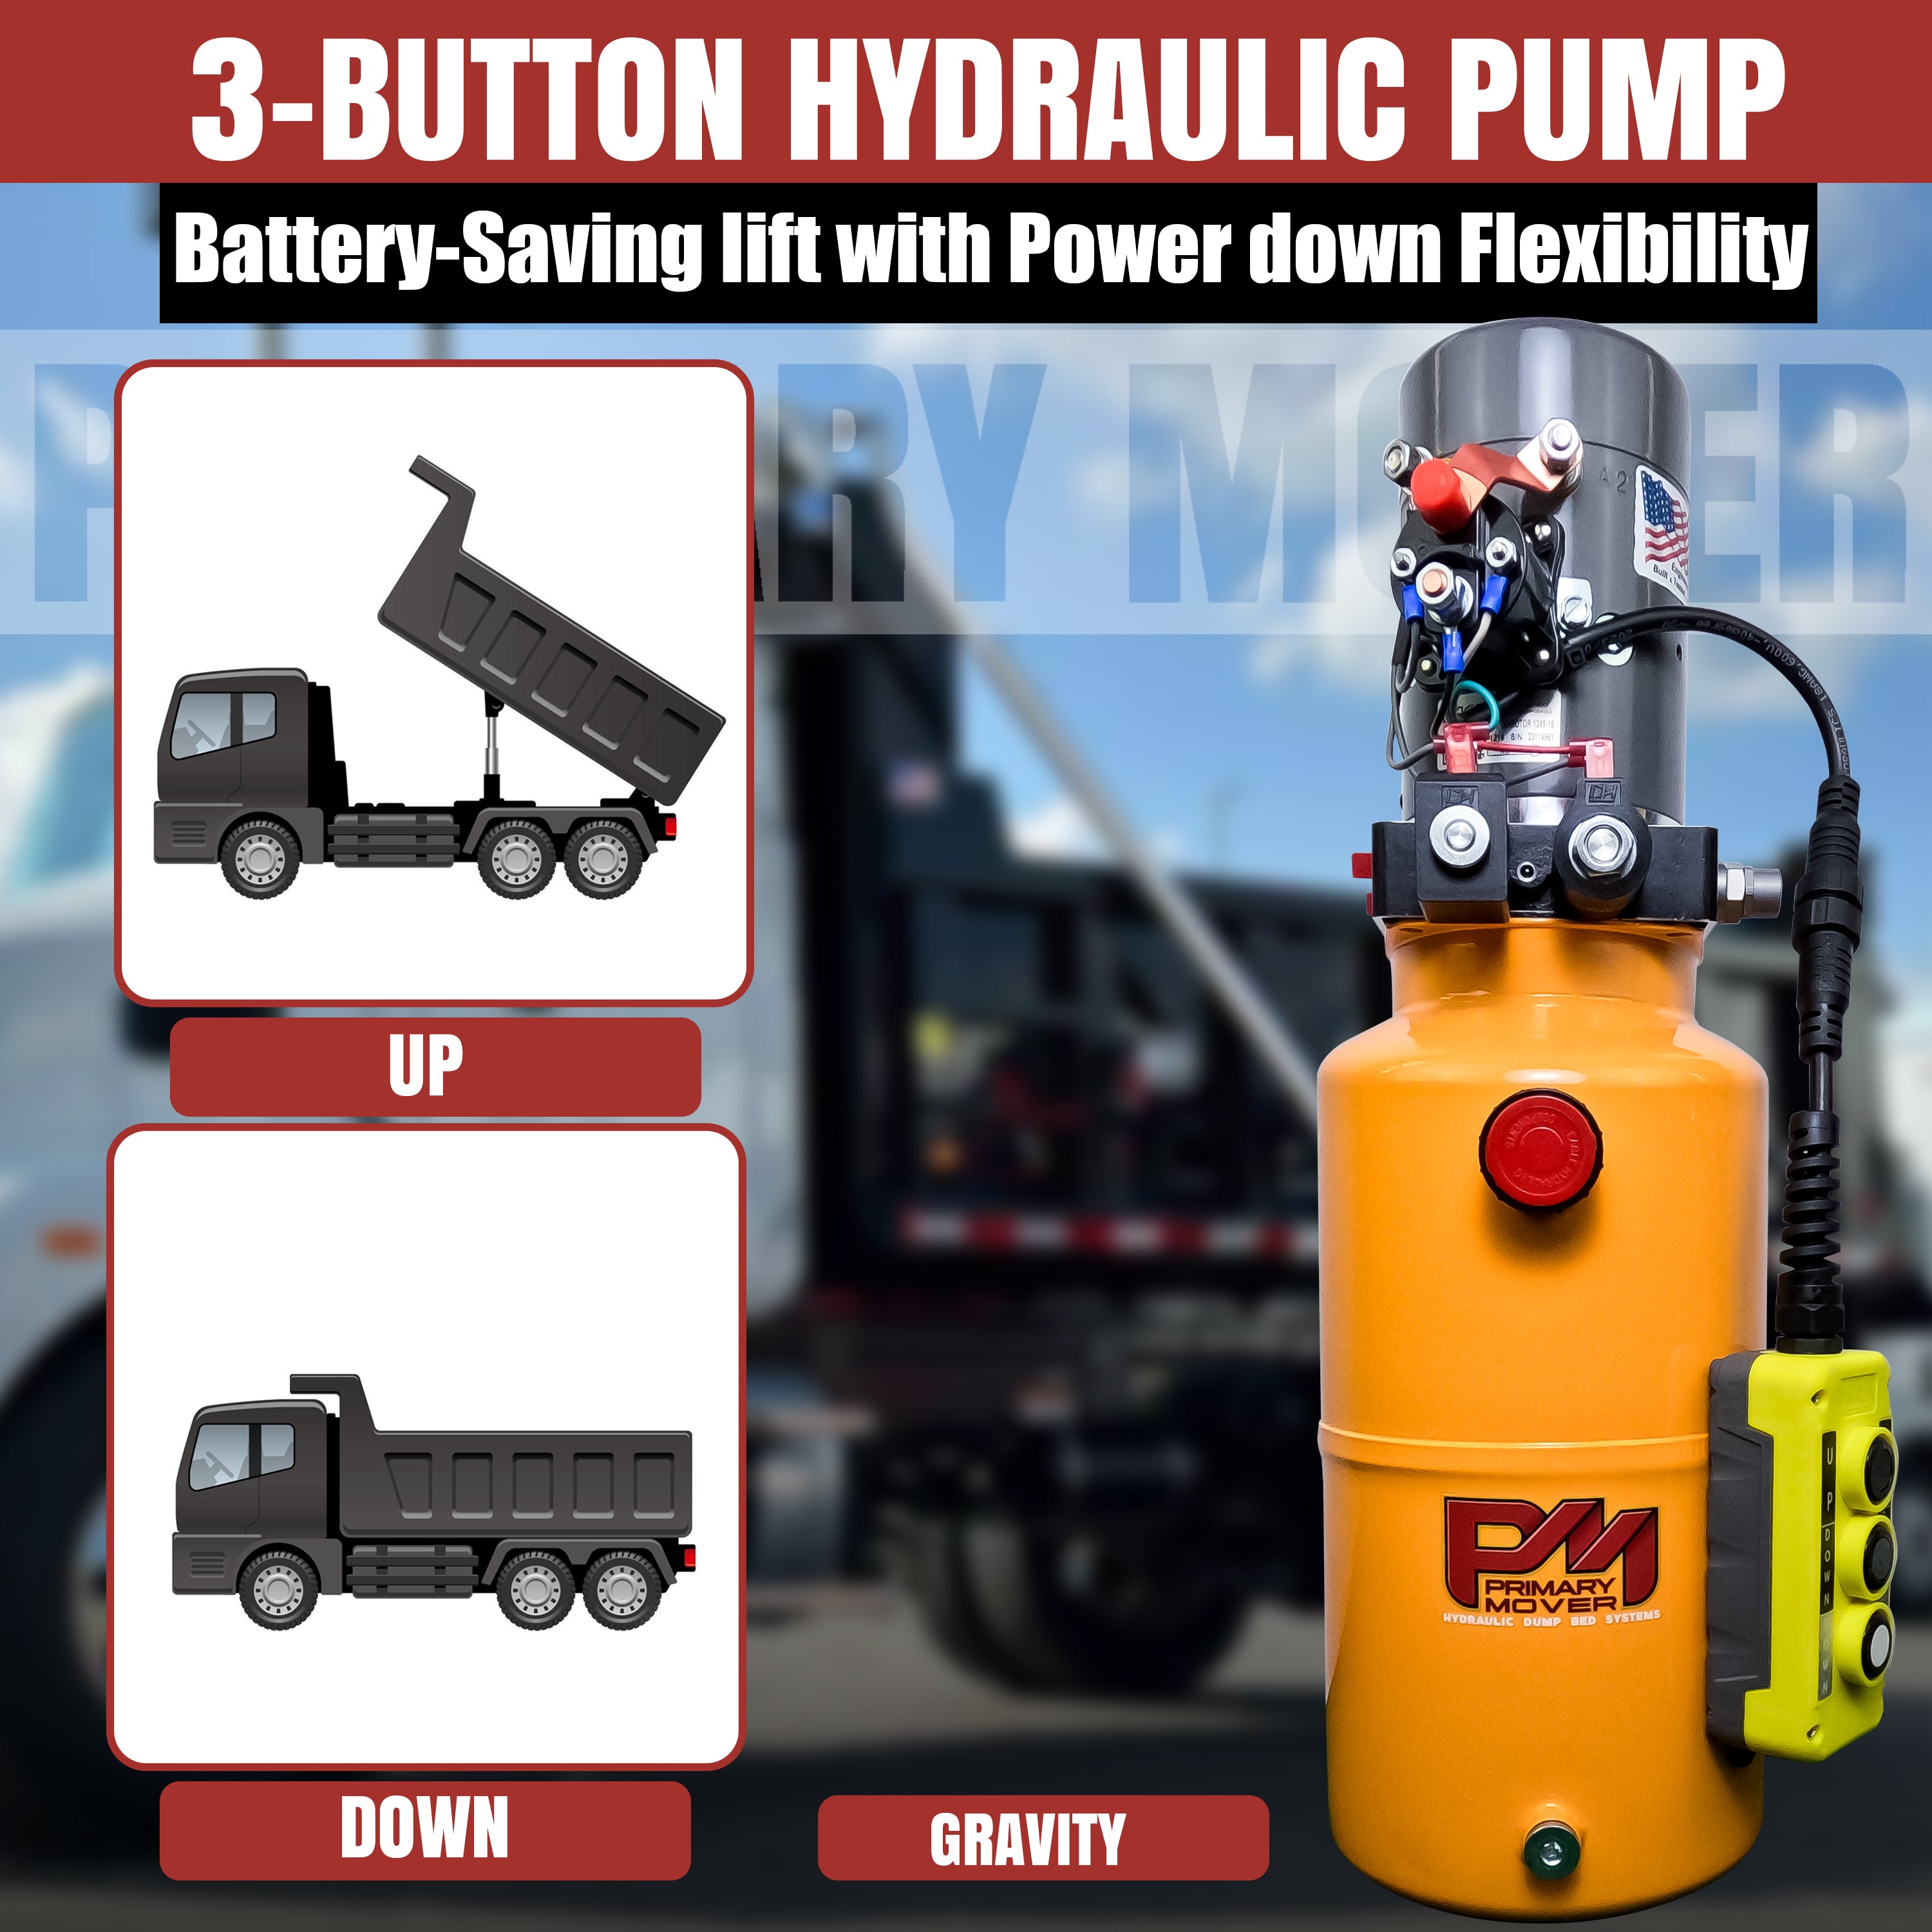 KTI 12V Double-Acting Hydraulic Pump with Steel Reservoir, featuring a robust, compact design and visible control buttons for efficient hydraulic dump bed systems.